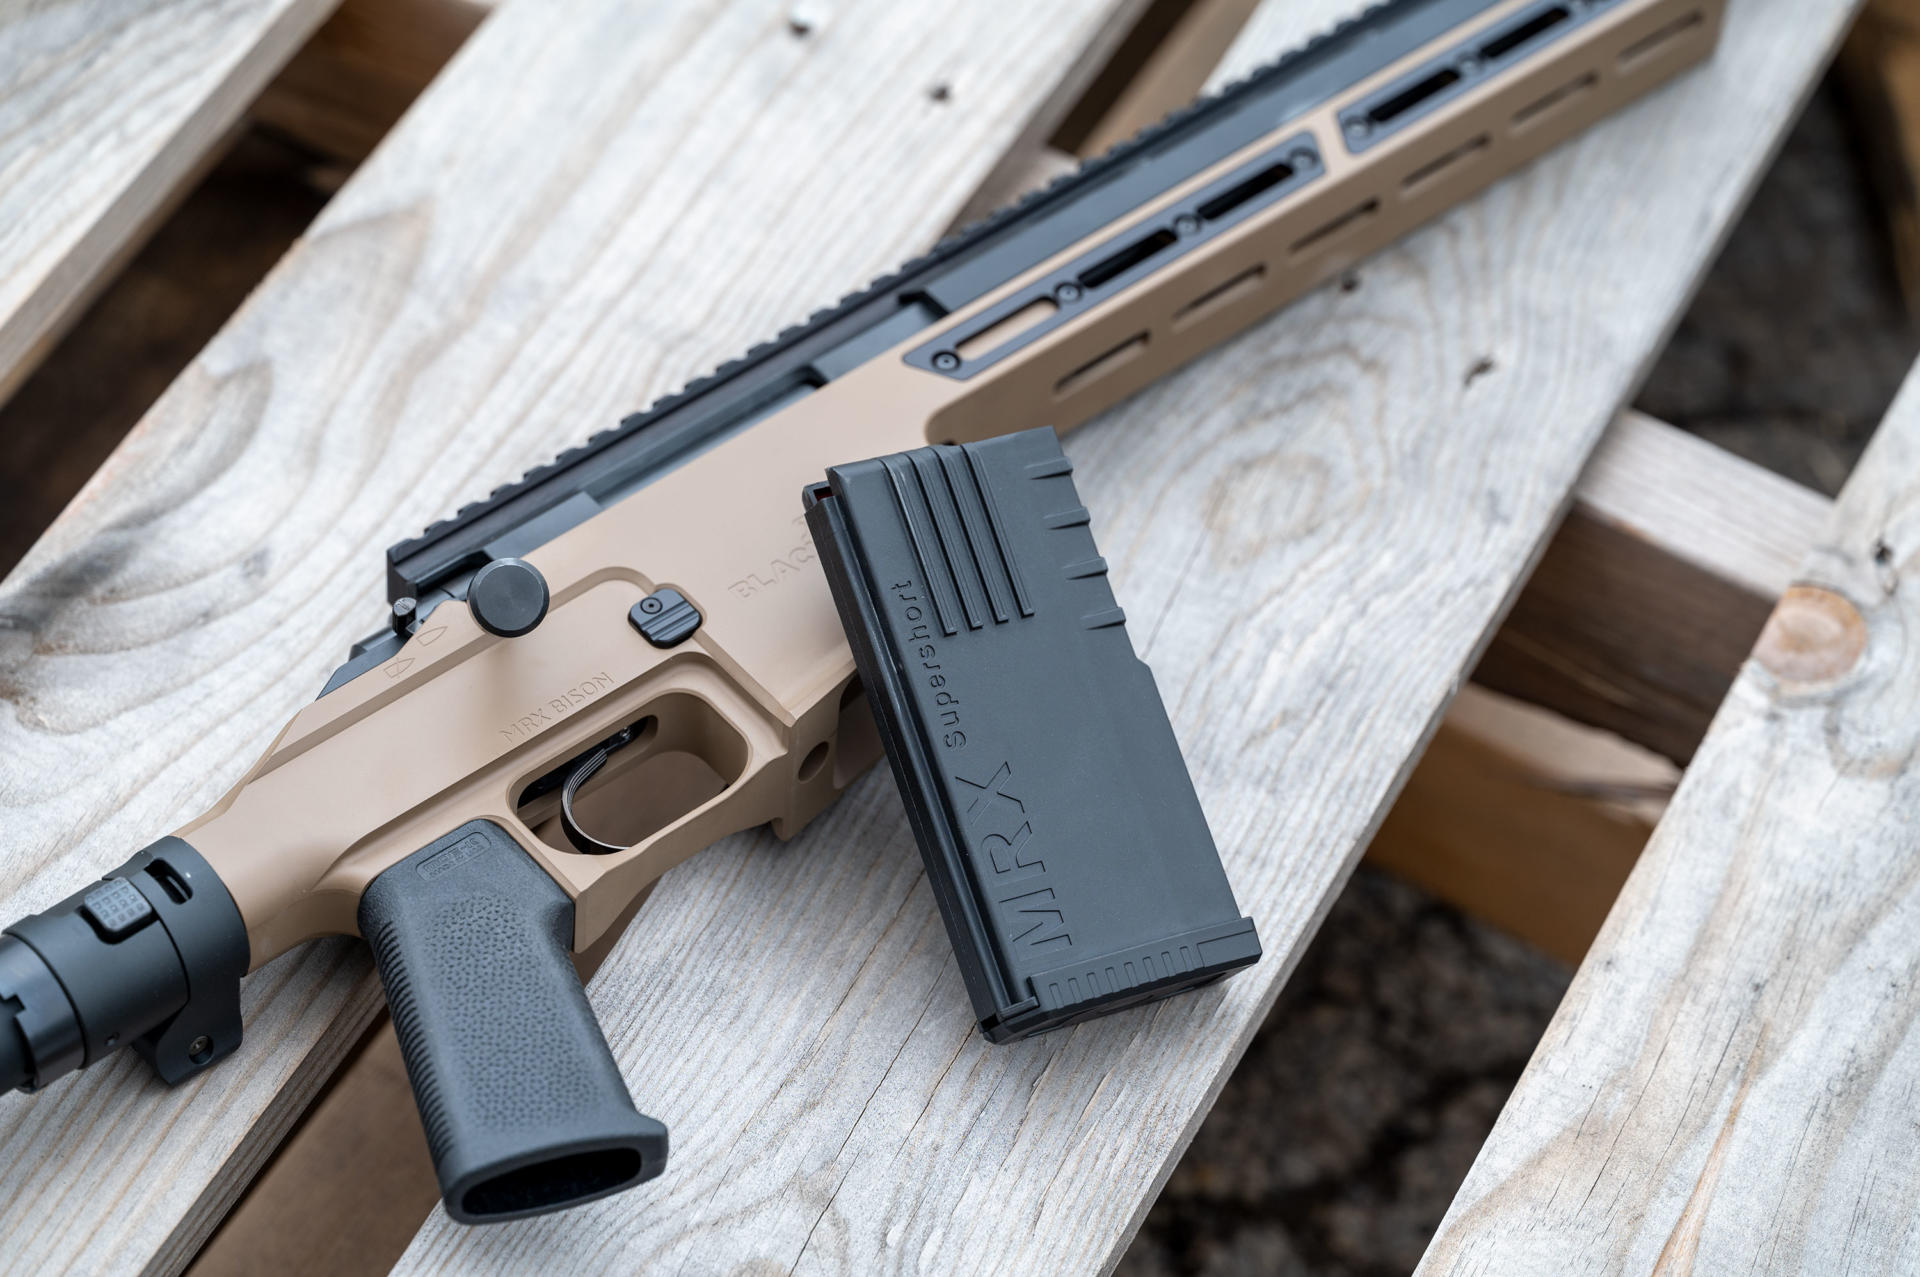 Black Creek Labs' 20-round Bison mags now on the market